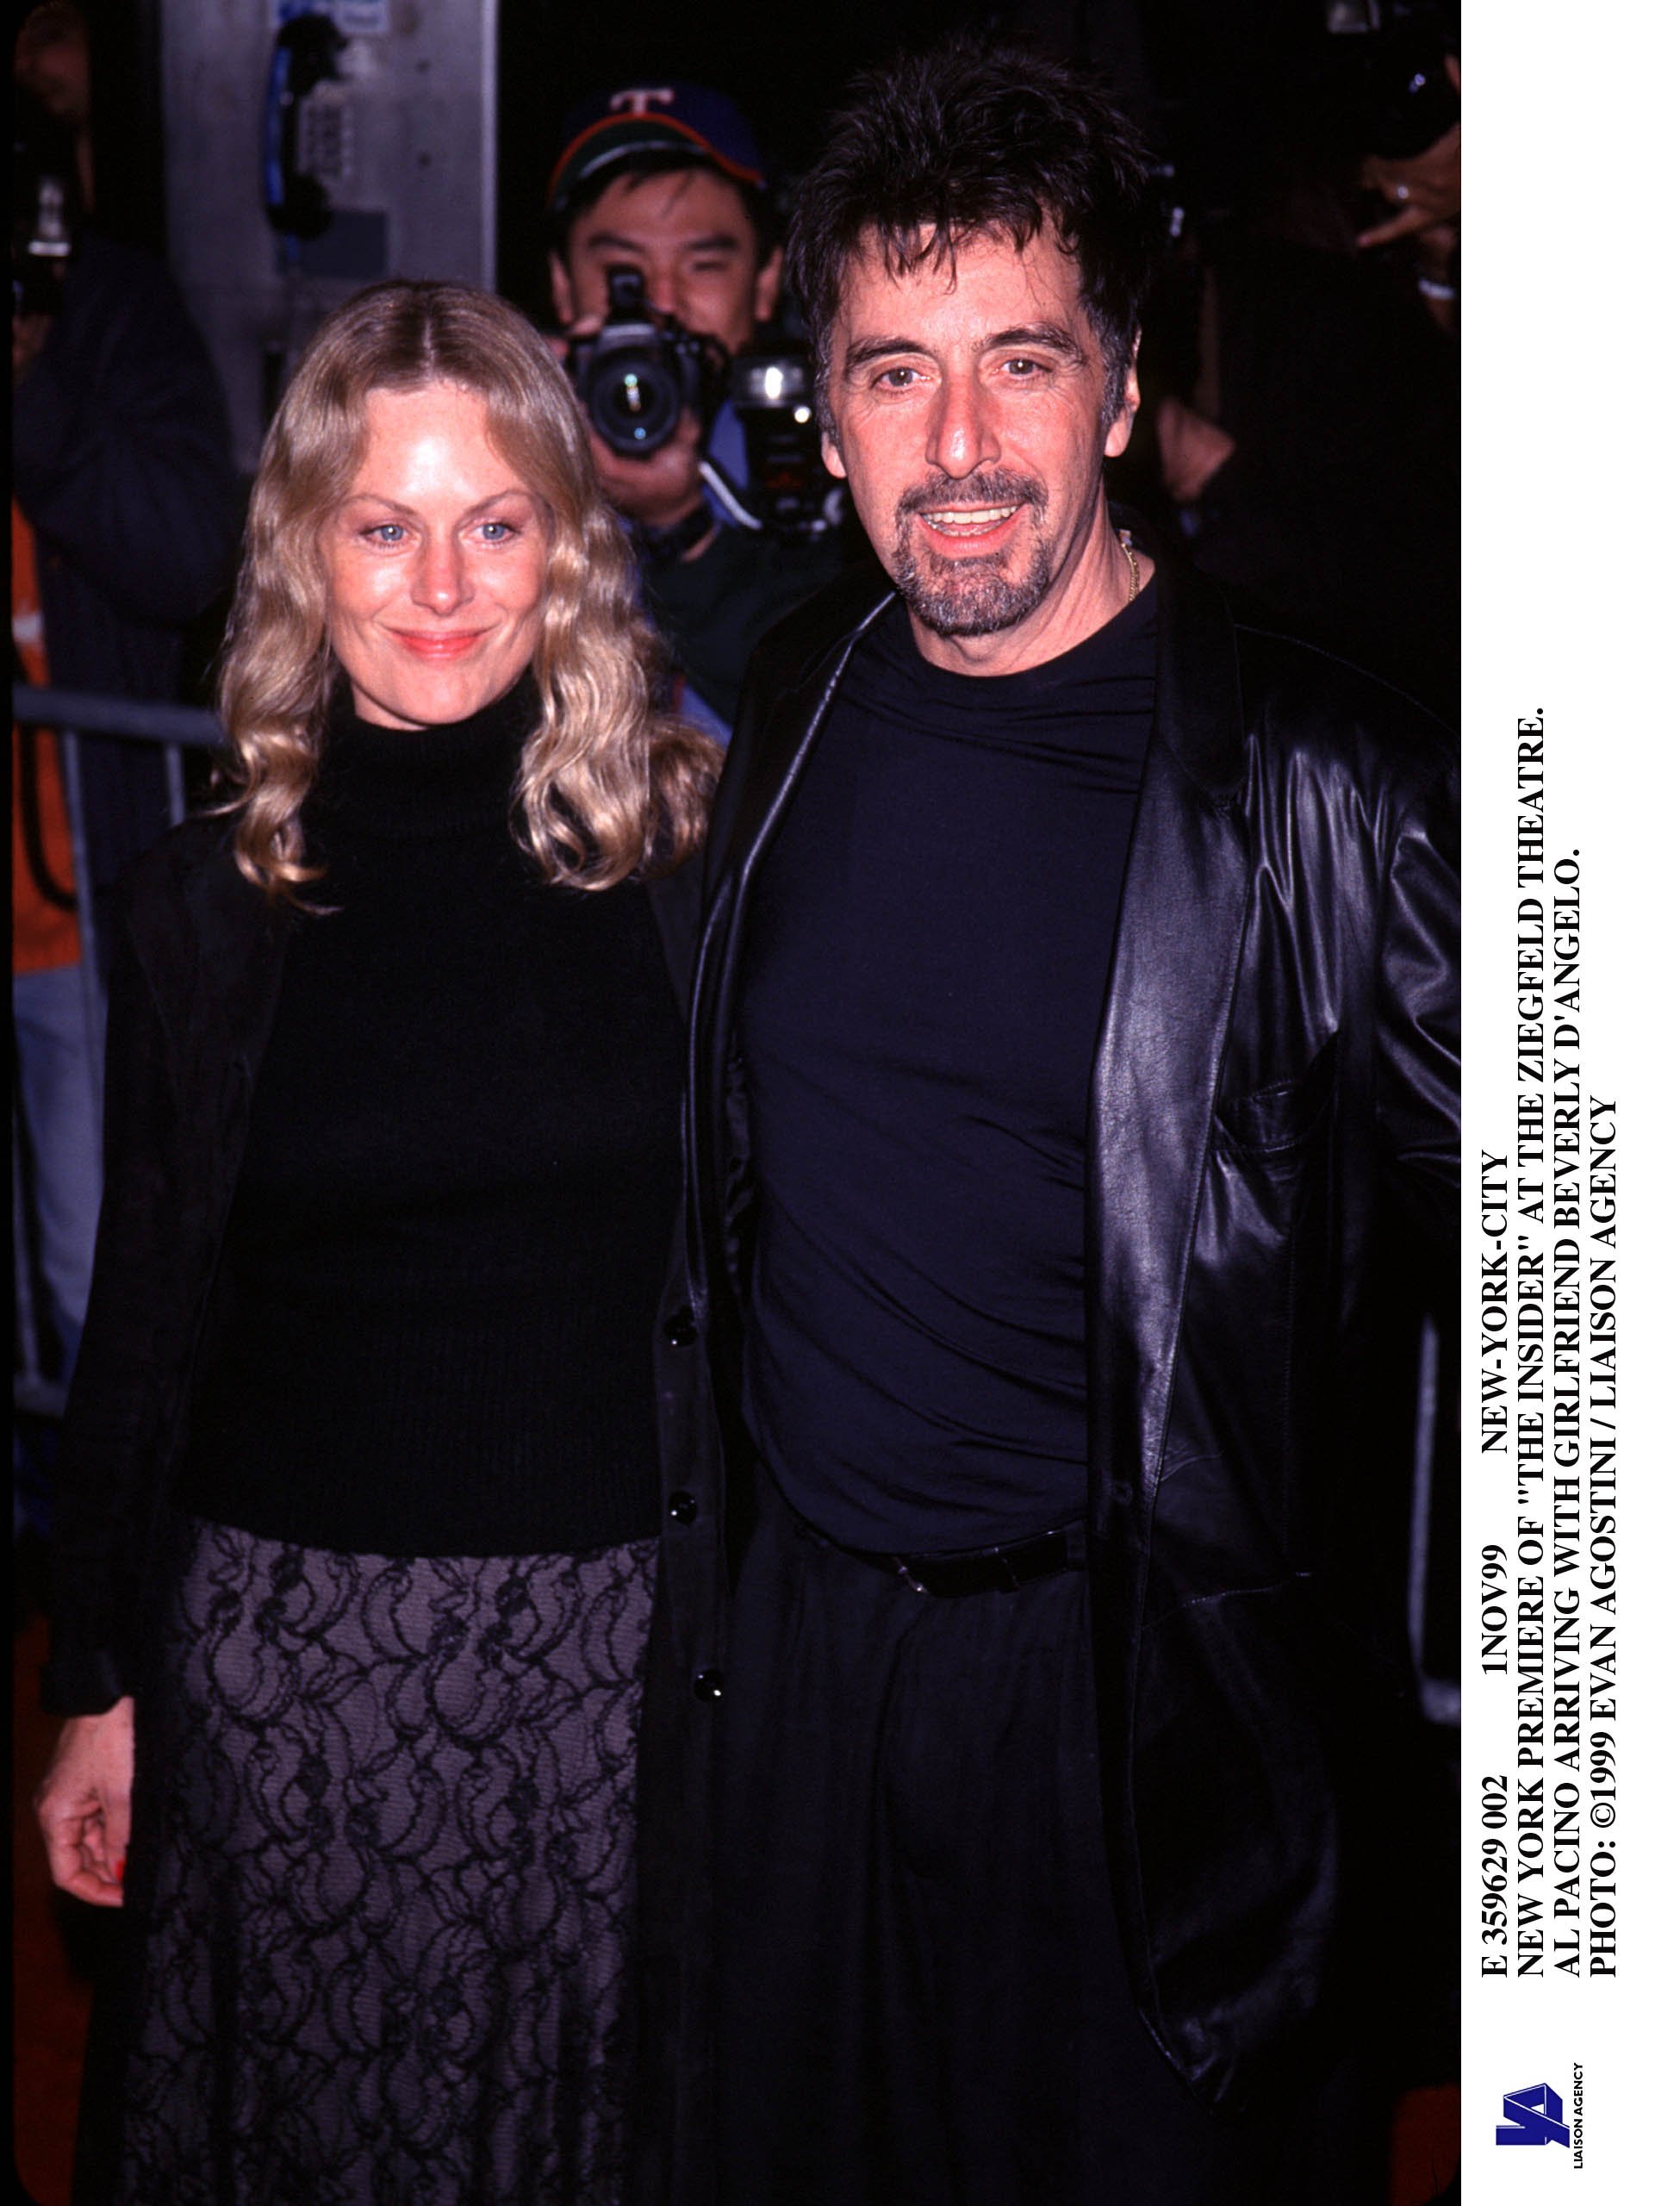 Al Pacino and Beverly D'Angelo at the New York Premiere Of "The Insider" on November 1, 1999 | Source: Getty Images